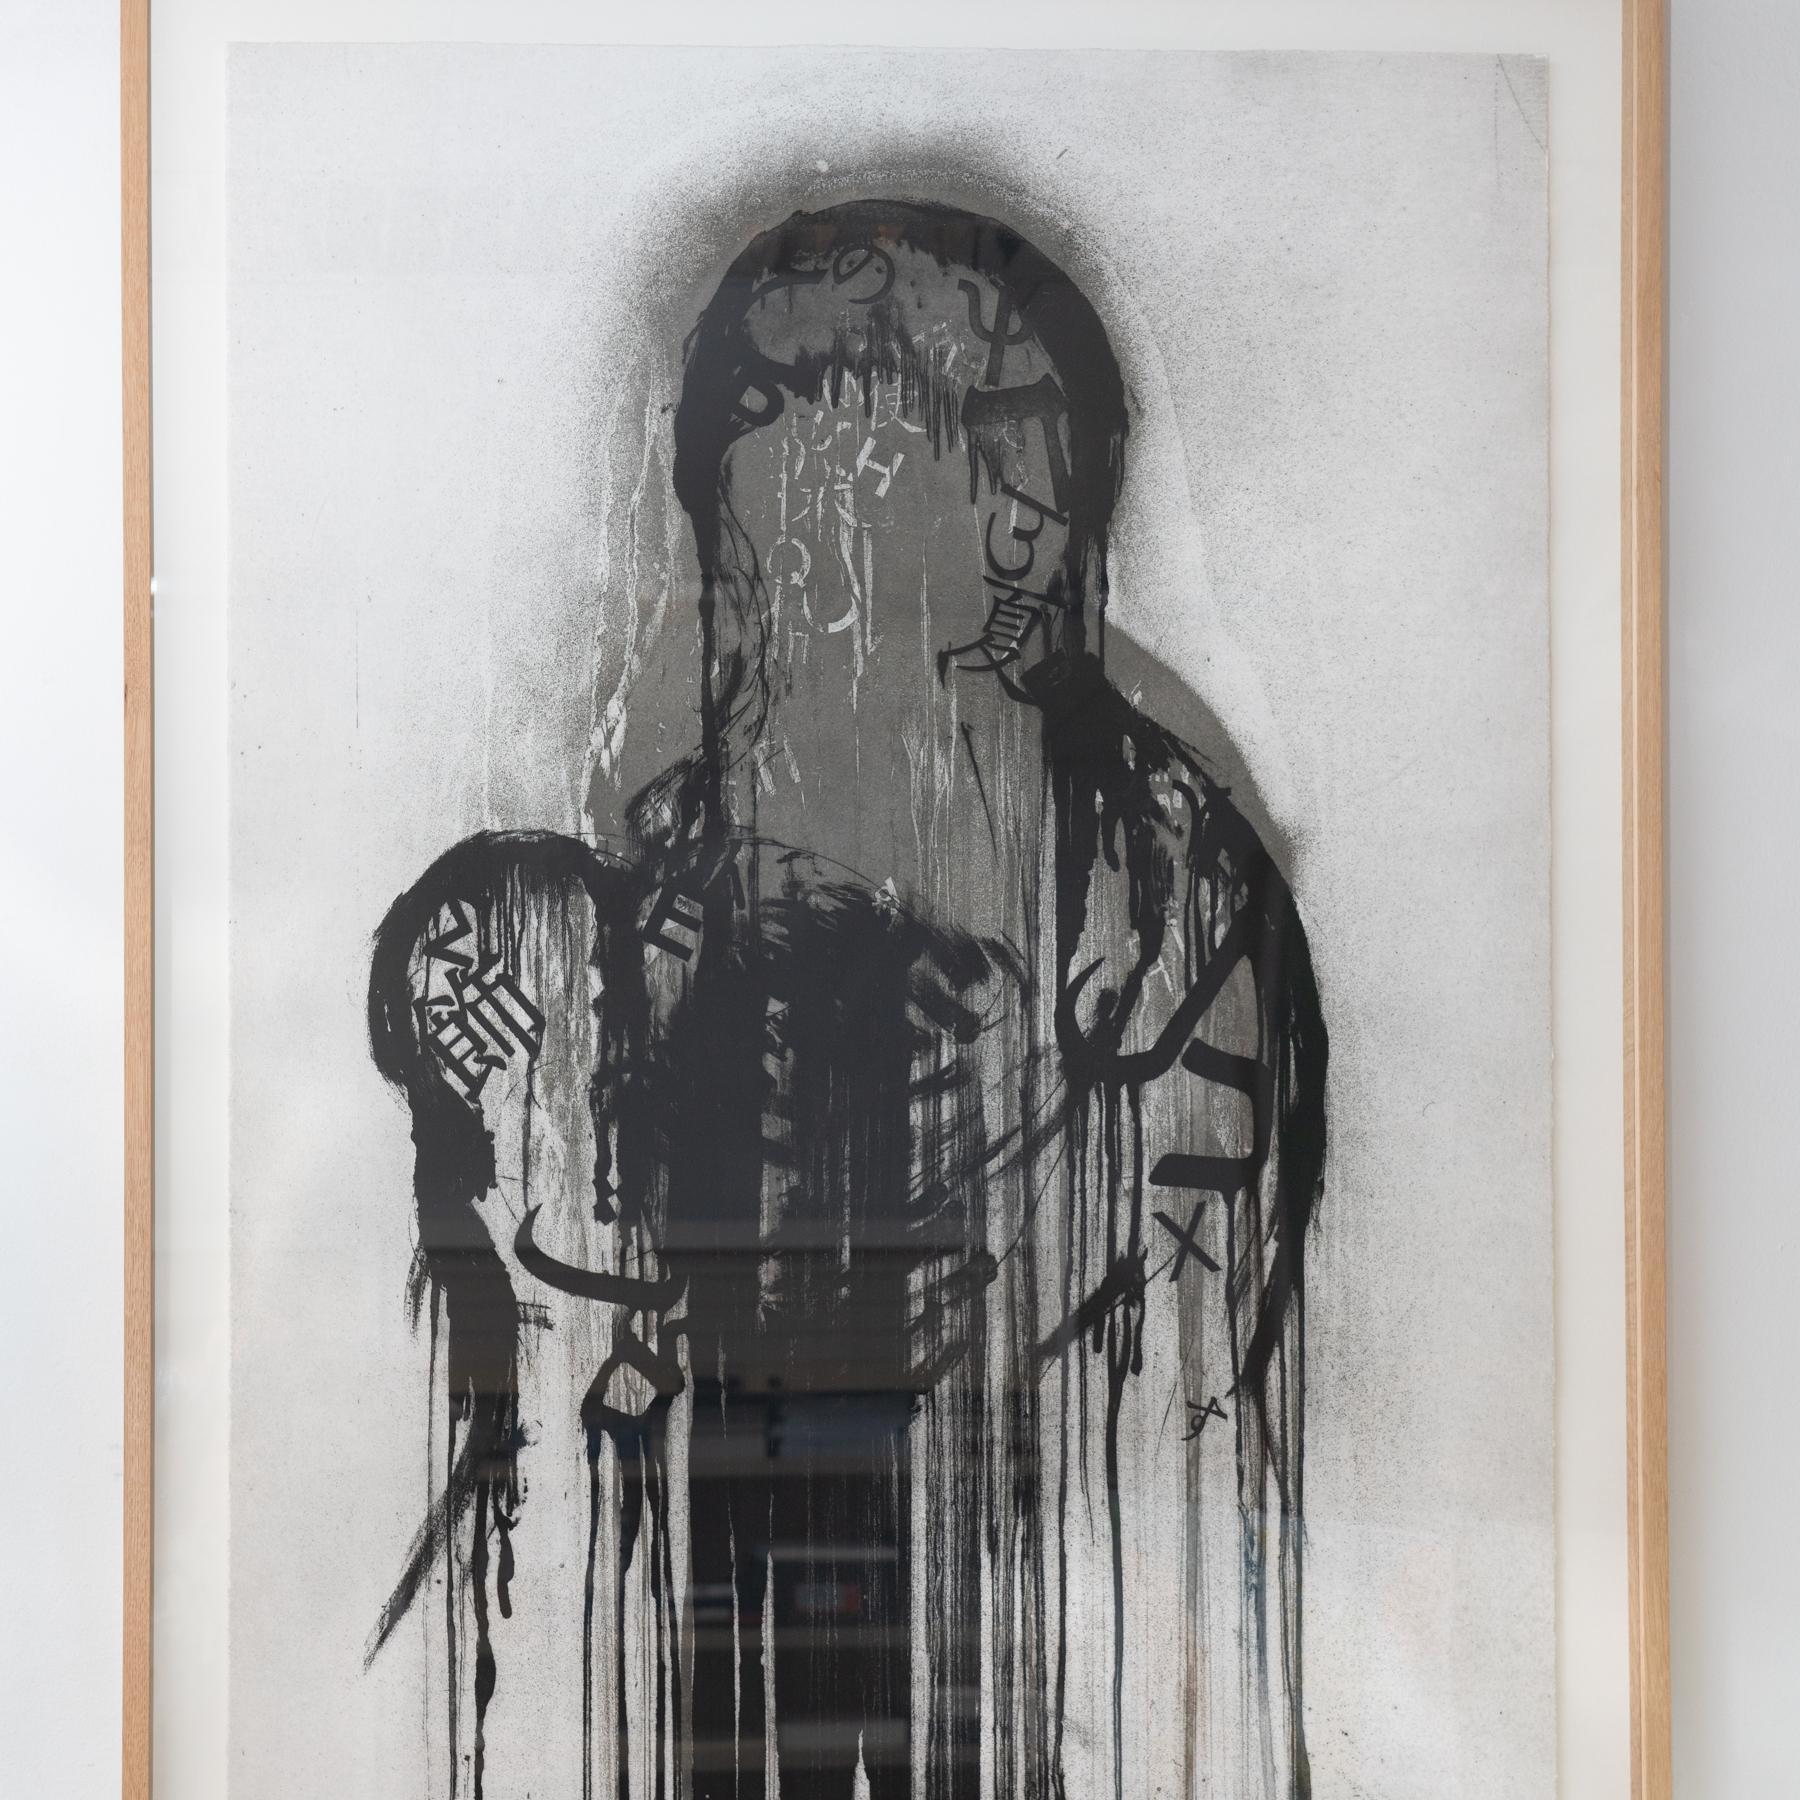 Framed 'Untilted 2' Photoetching on Hahnemühle paper.

Made by Jaume Plensa in Spain, circa 2021.

In original condition, with minor wear consistent with age and use, preserving a beautiful patina.

Numbered and hand signed by the artist,